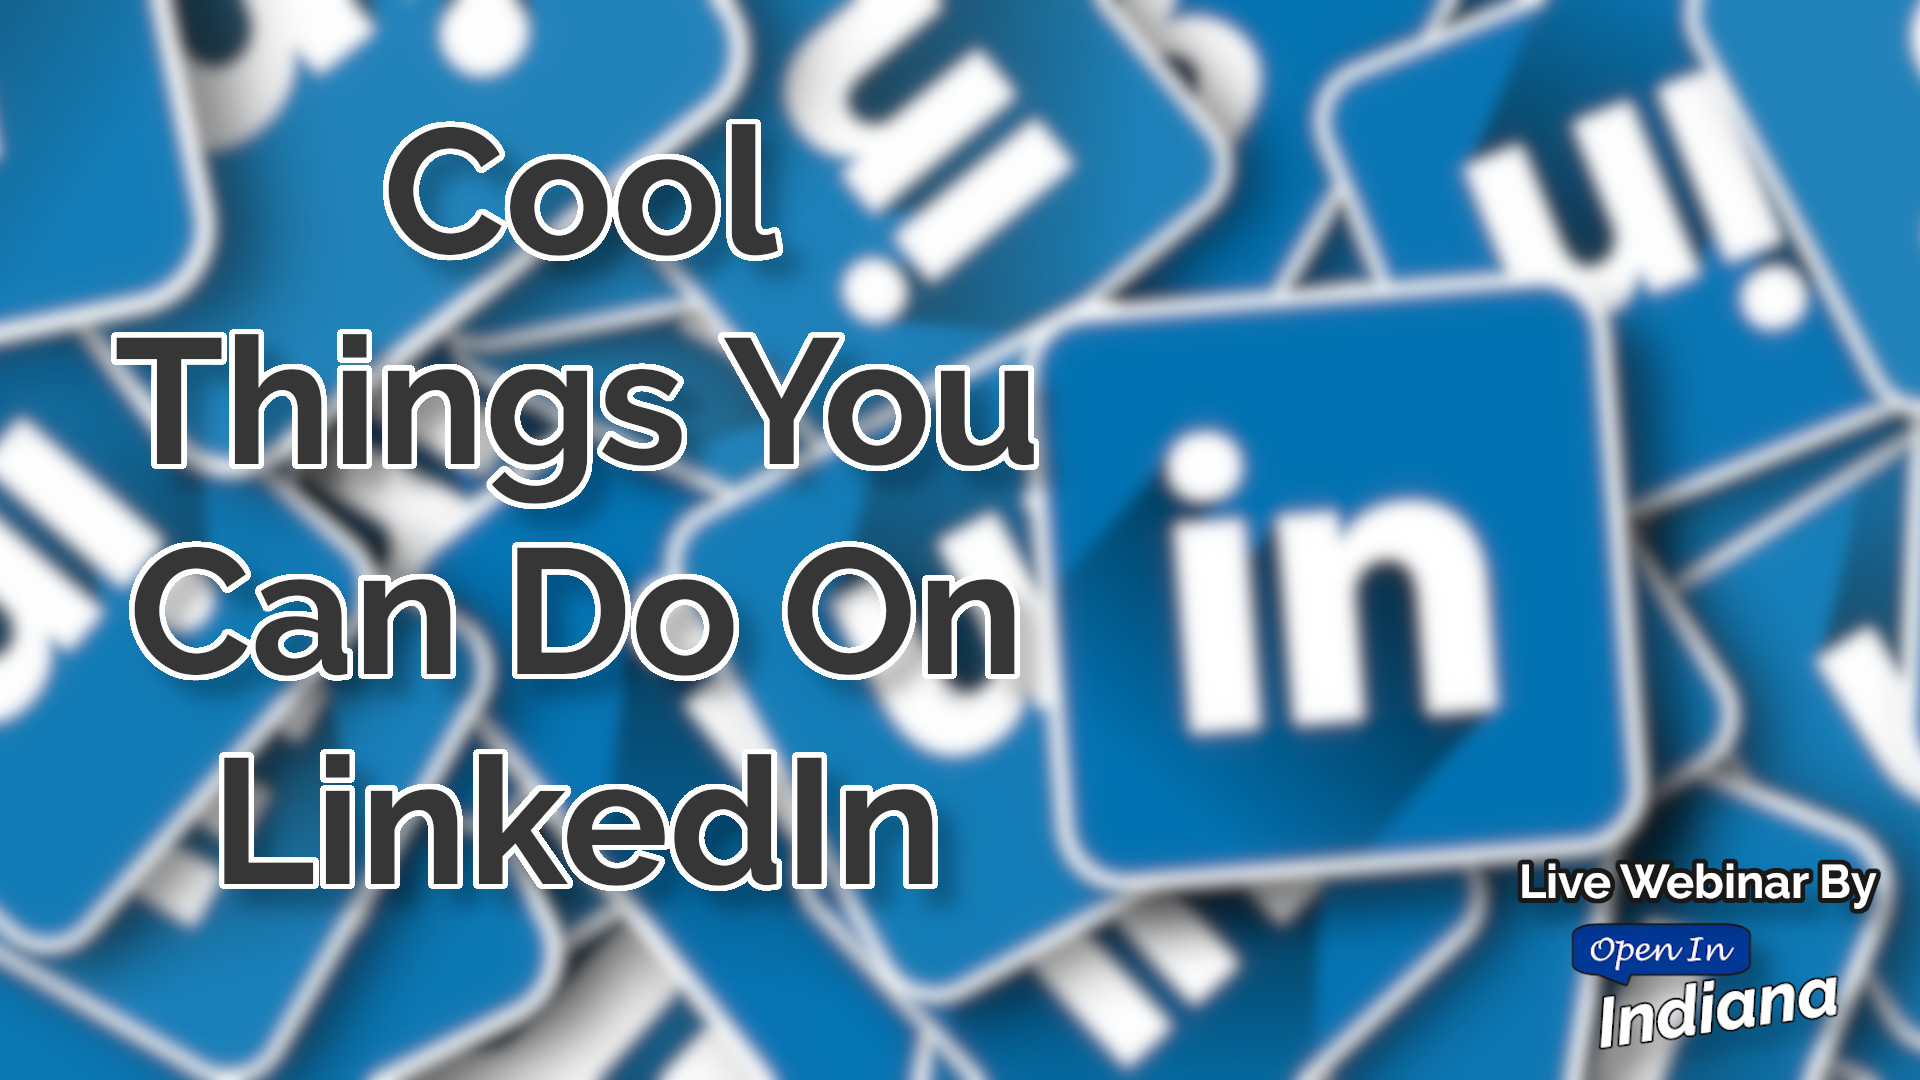 Cool Things You Can Do on LinkedIn